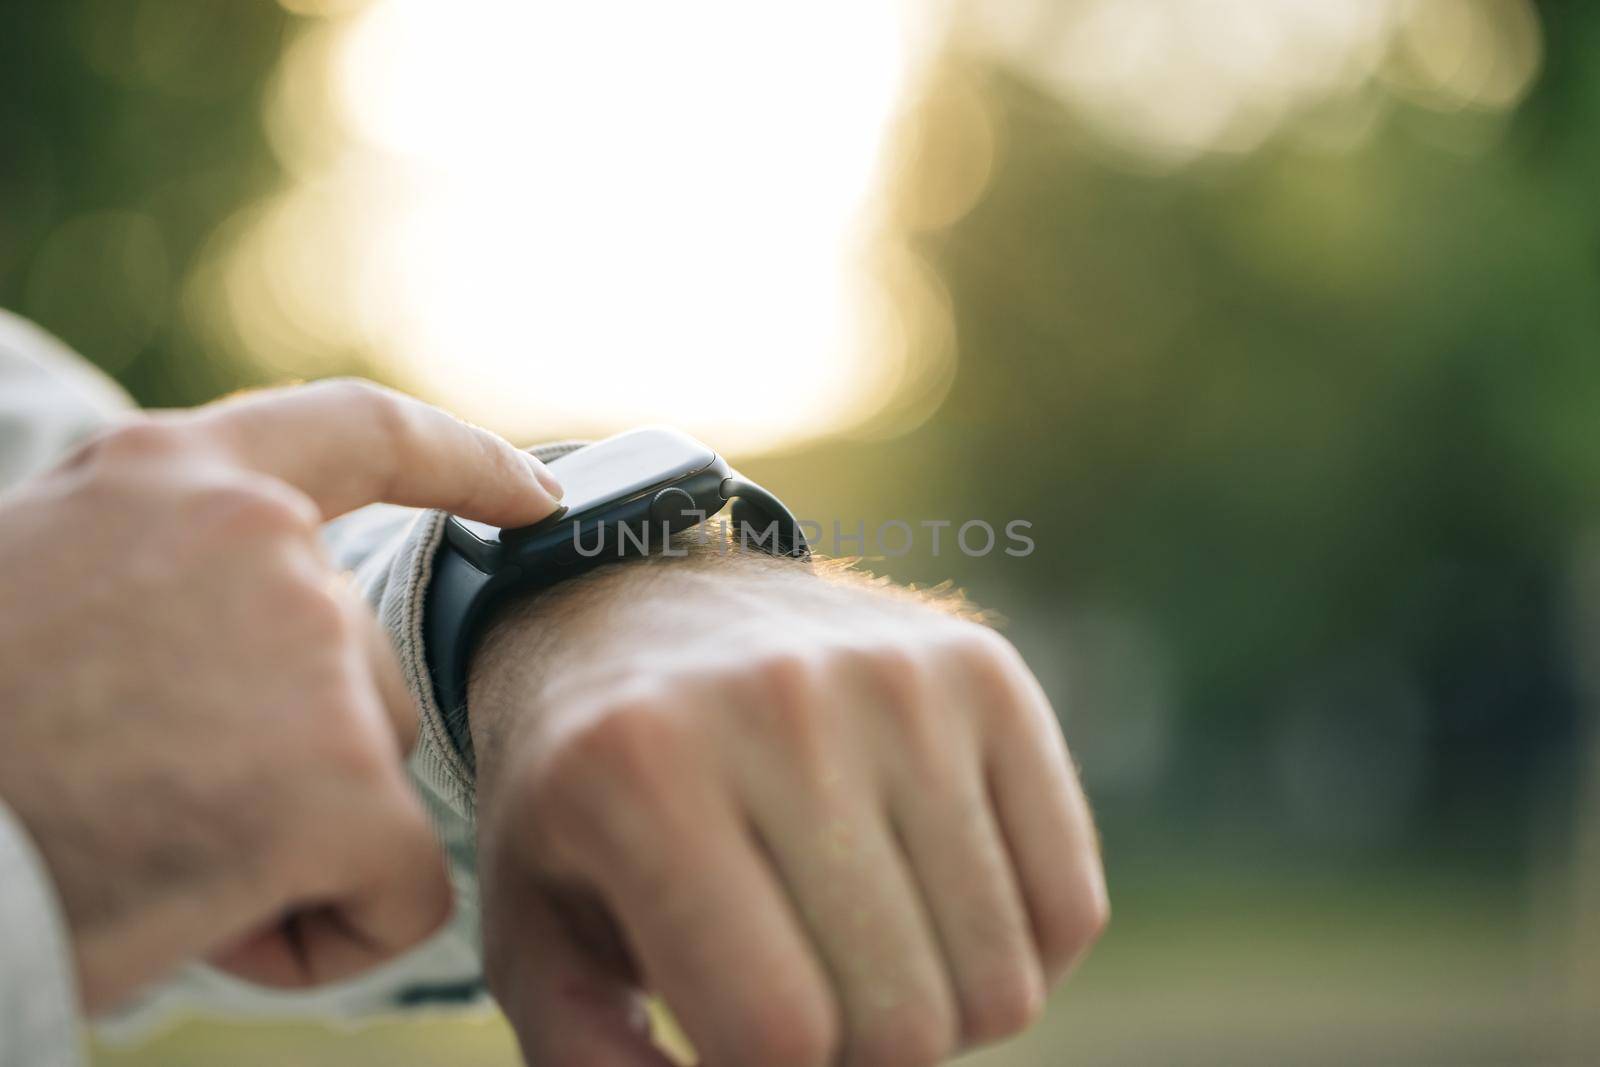 Smart watch. Smart watch on a man's hand outdoor. Man's hand touching a smartwatch. Close up shot of male's hand uses of wearable smart watch at outdoor in sunset.